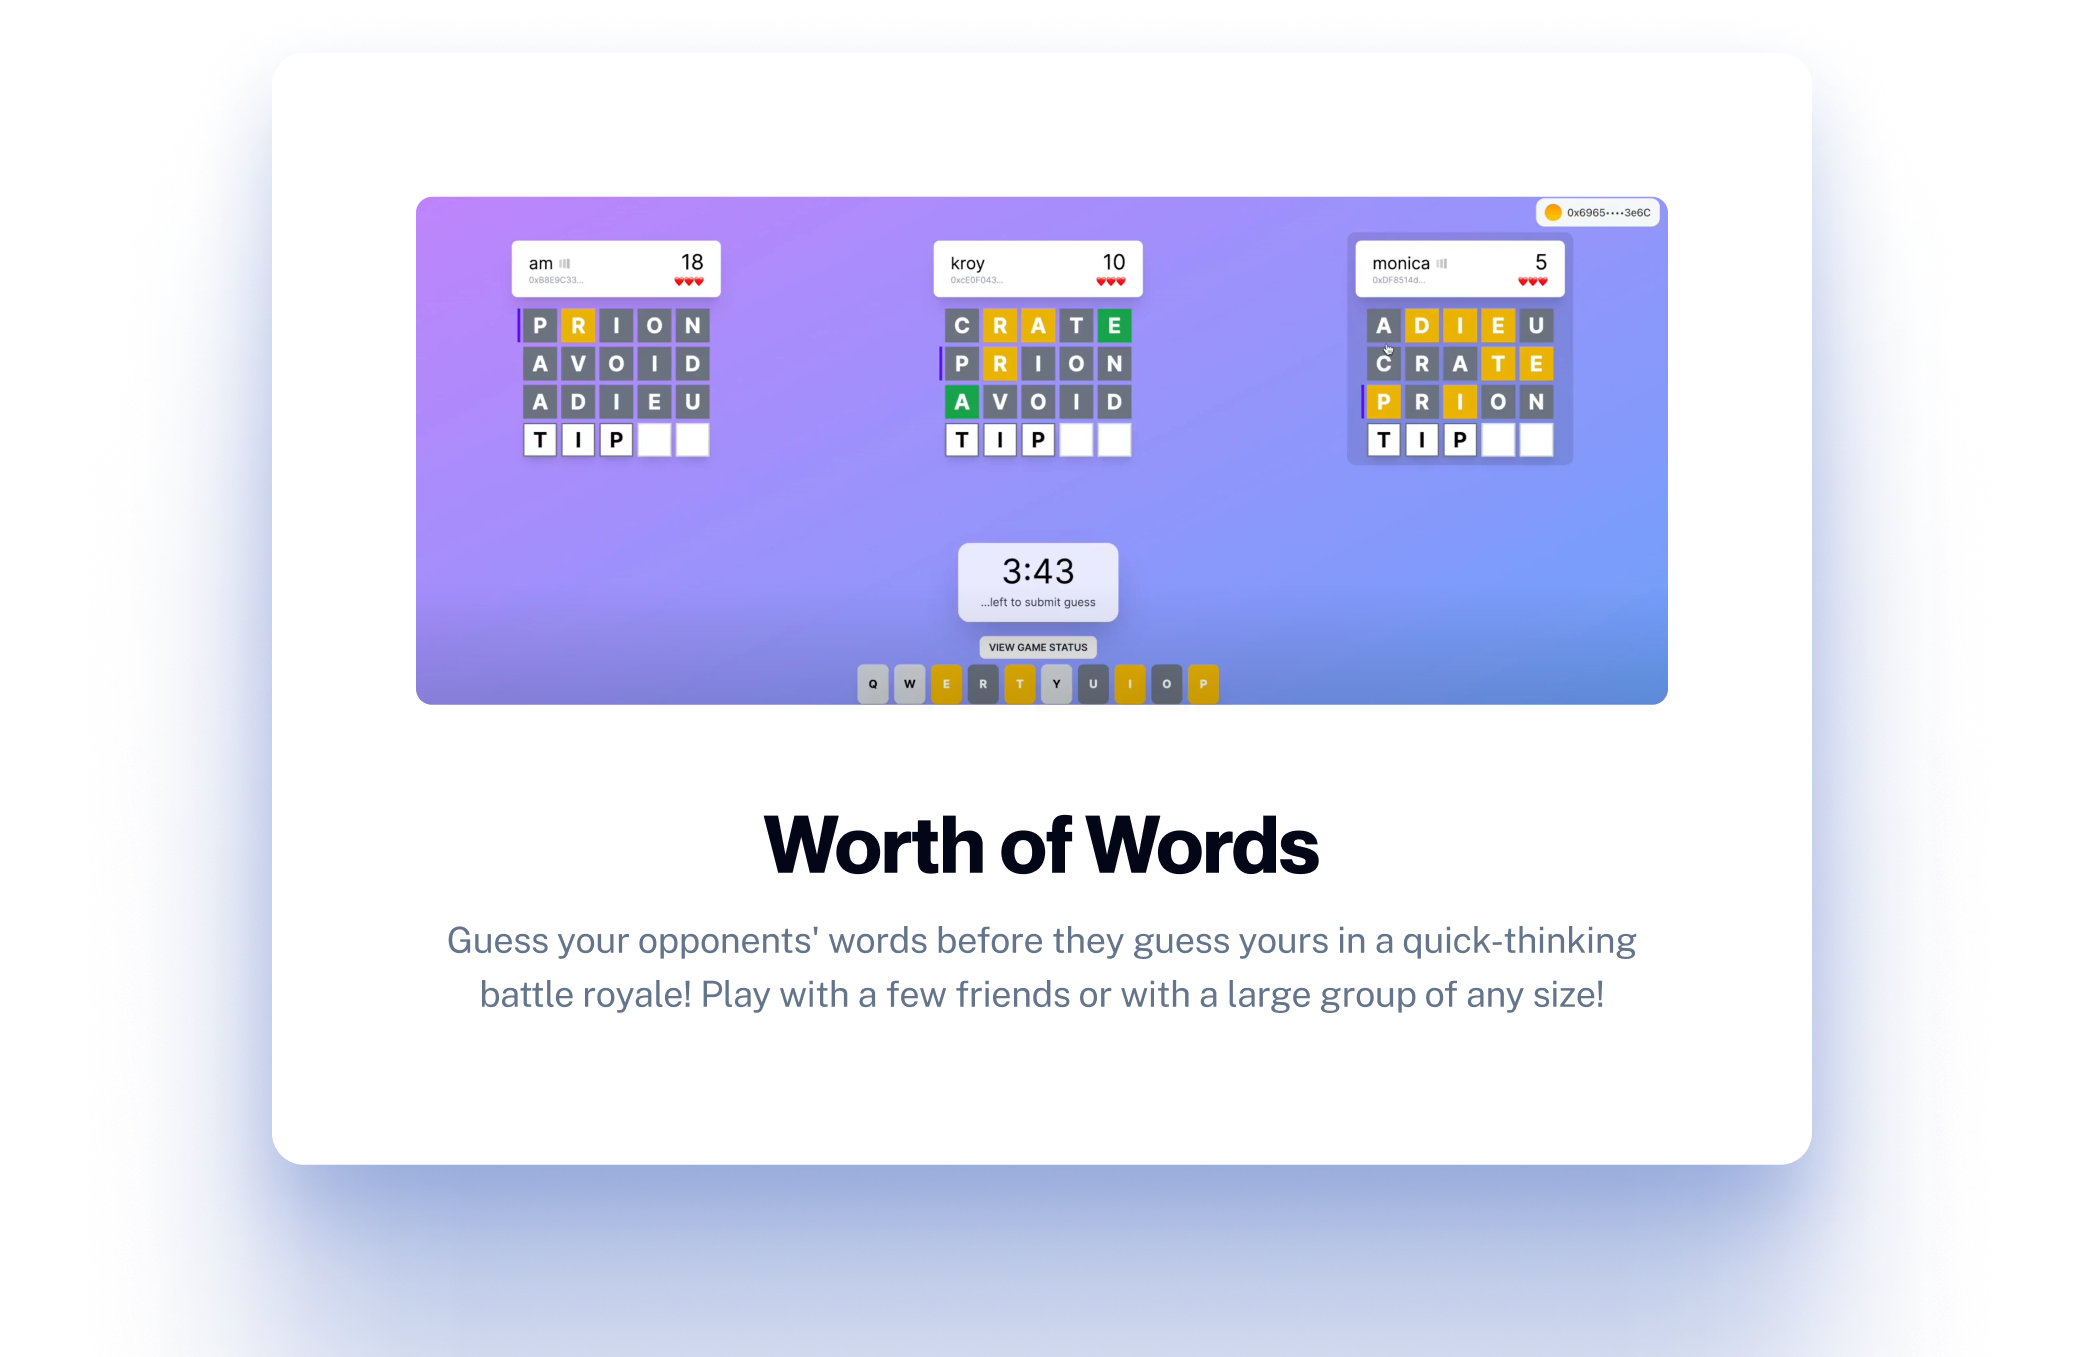 worth of words demo